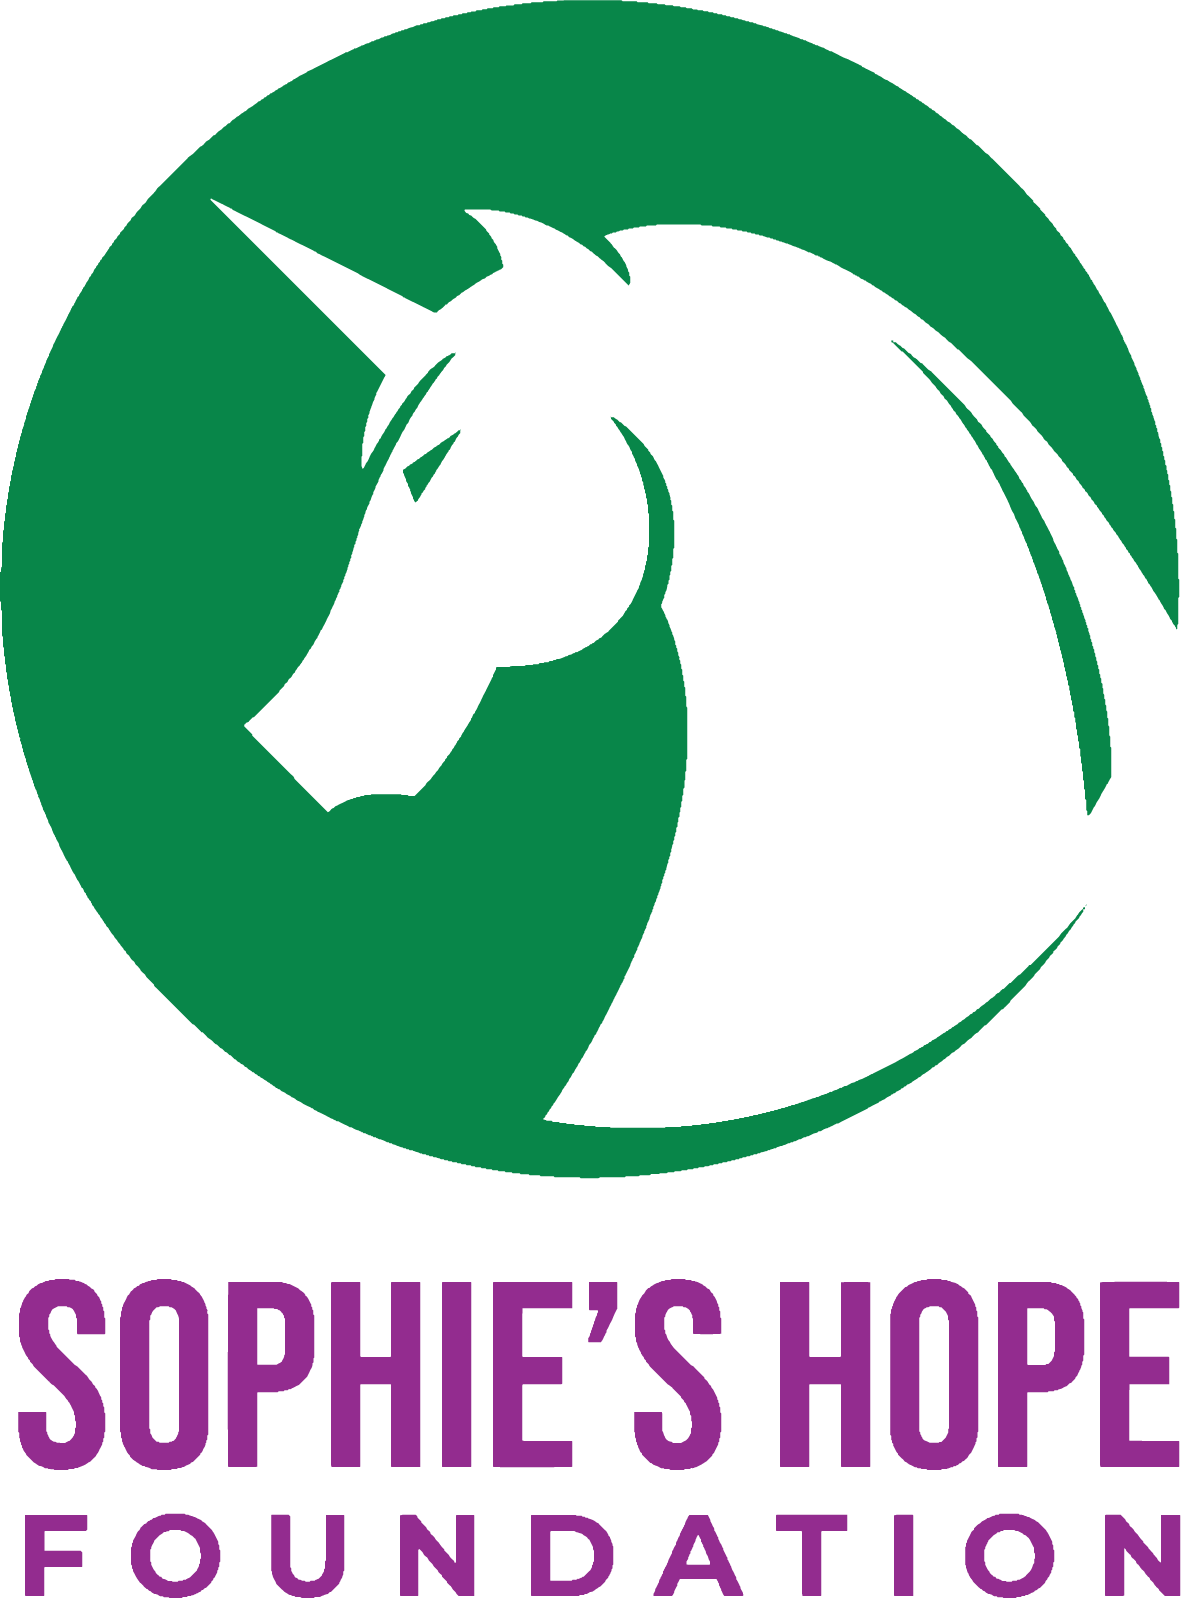 Sophie's Hope Foundation Store